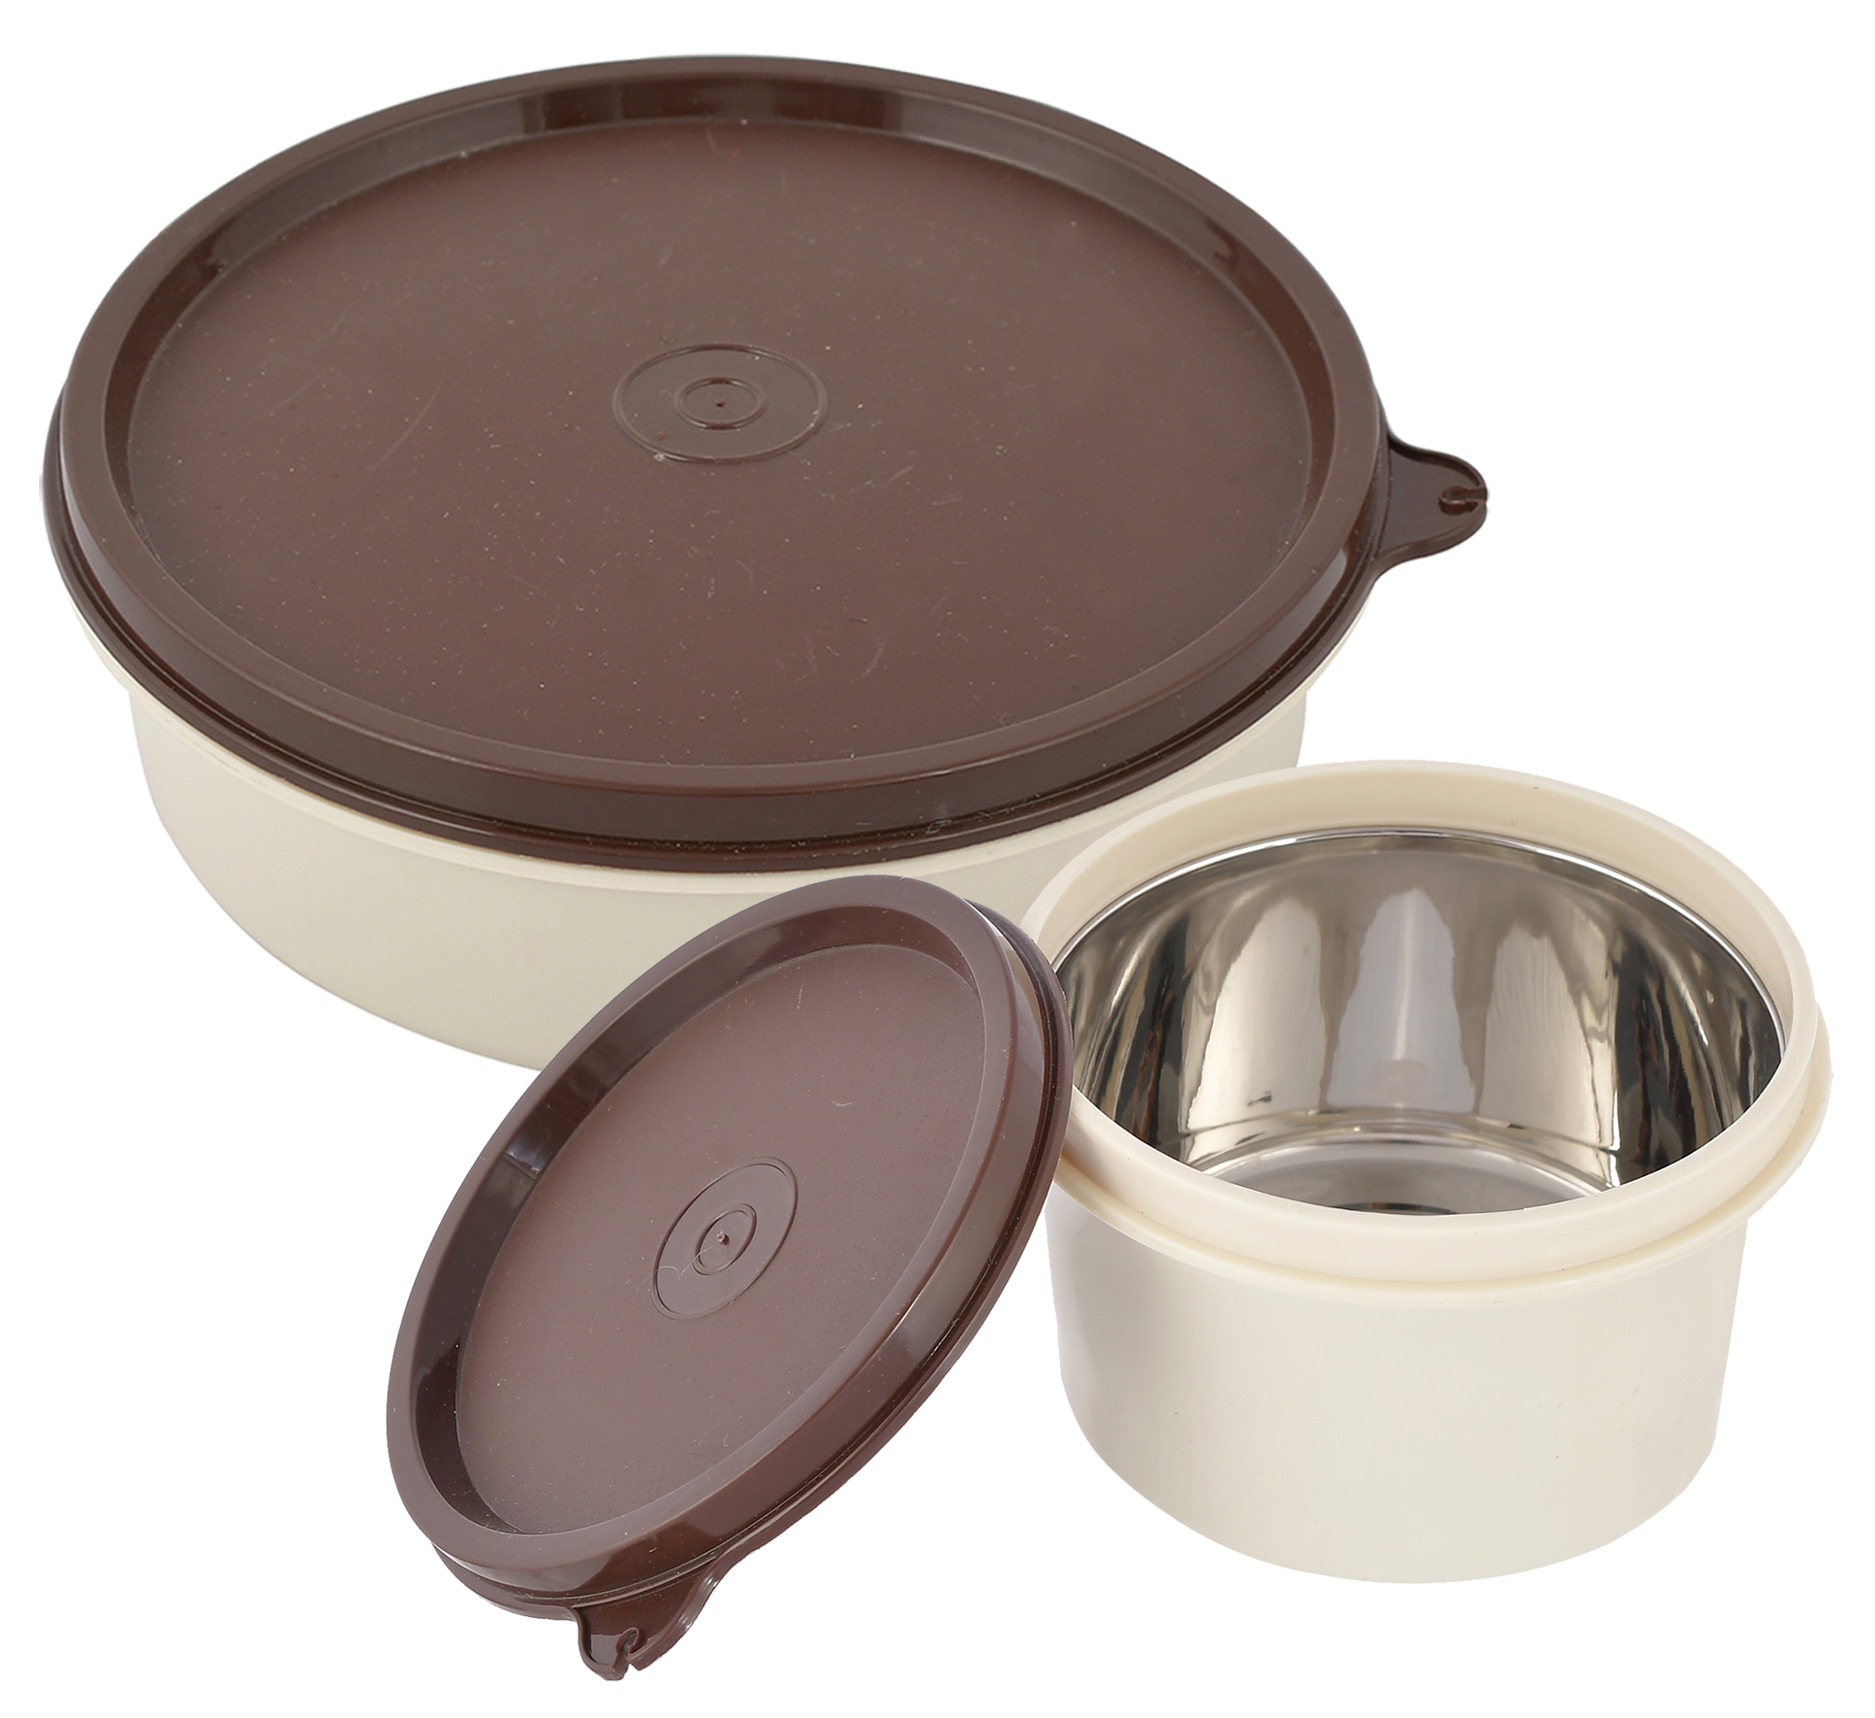 Kuber Industries BPA Free Food Grade Microwave Safe Inner Steel Lunch Containers Set, Set of 2 (Cream & Brown)-HS42KUBMART25141